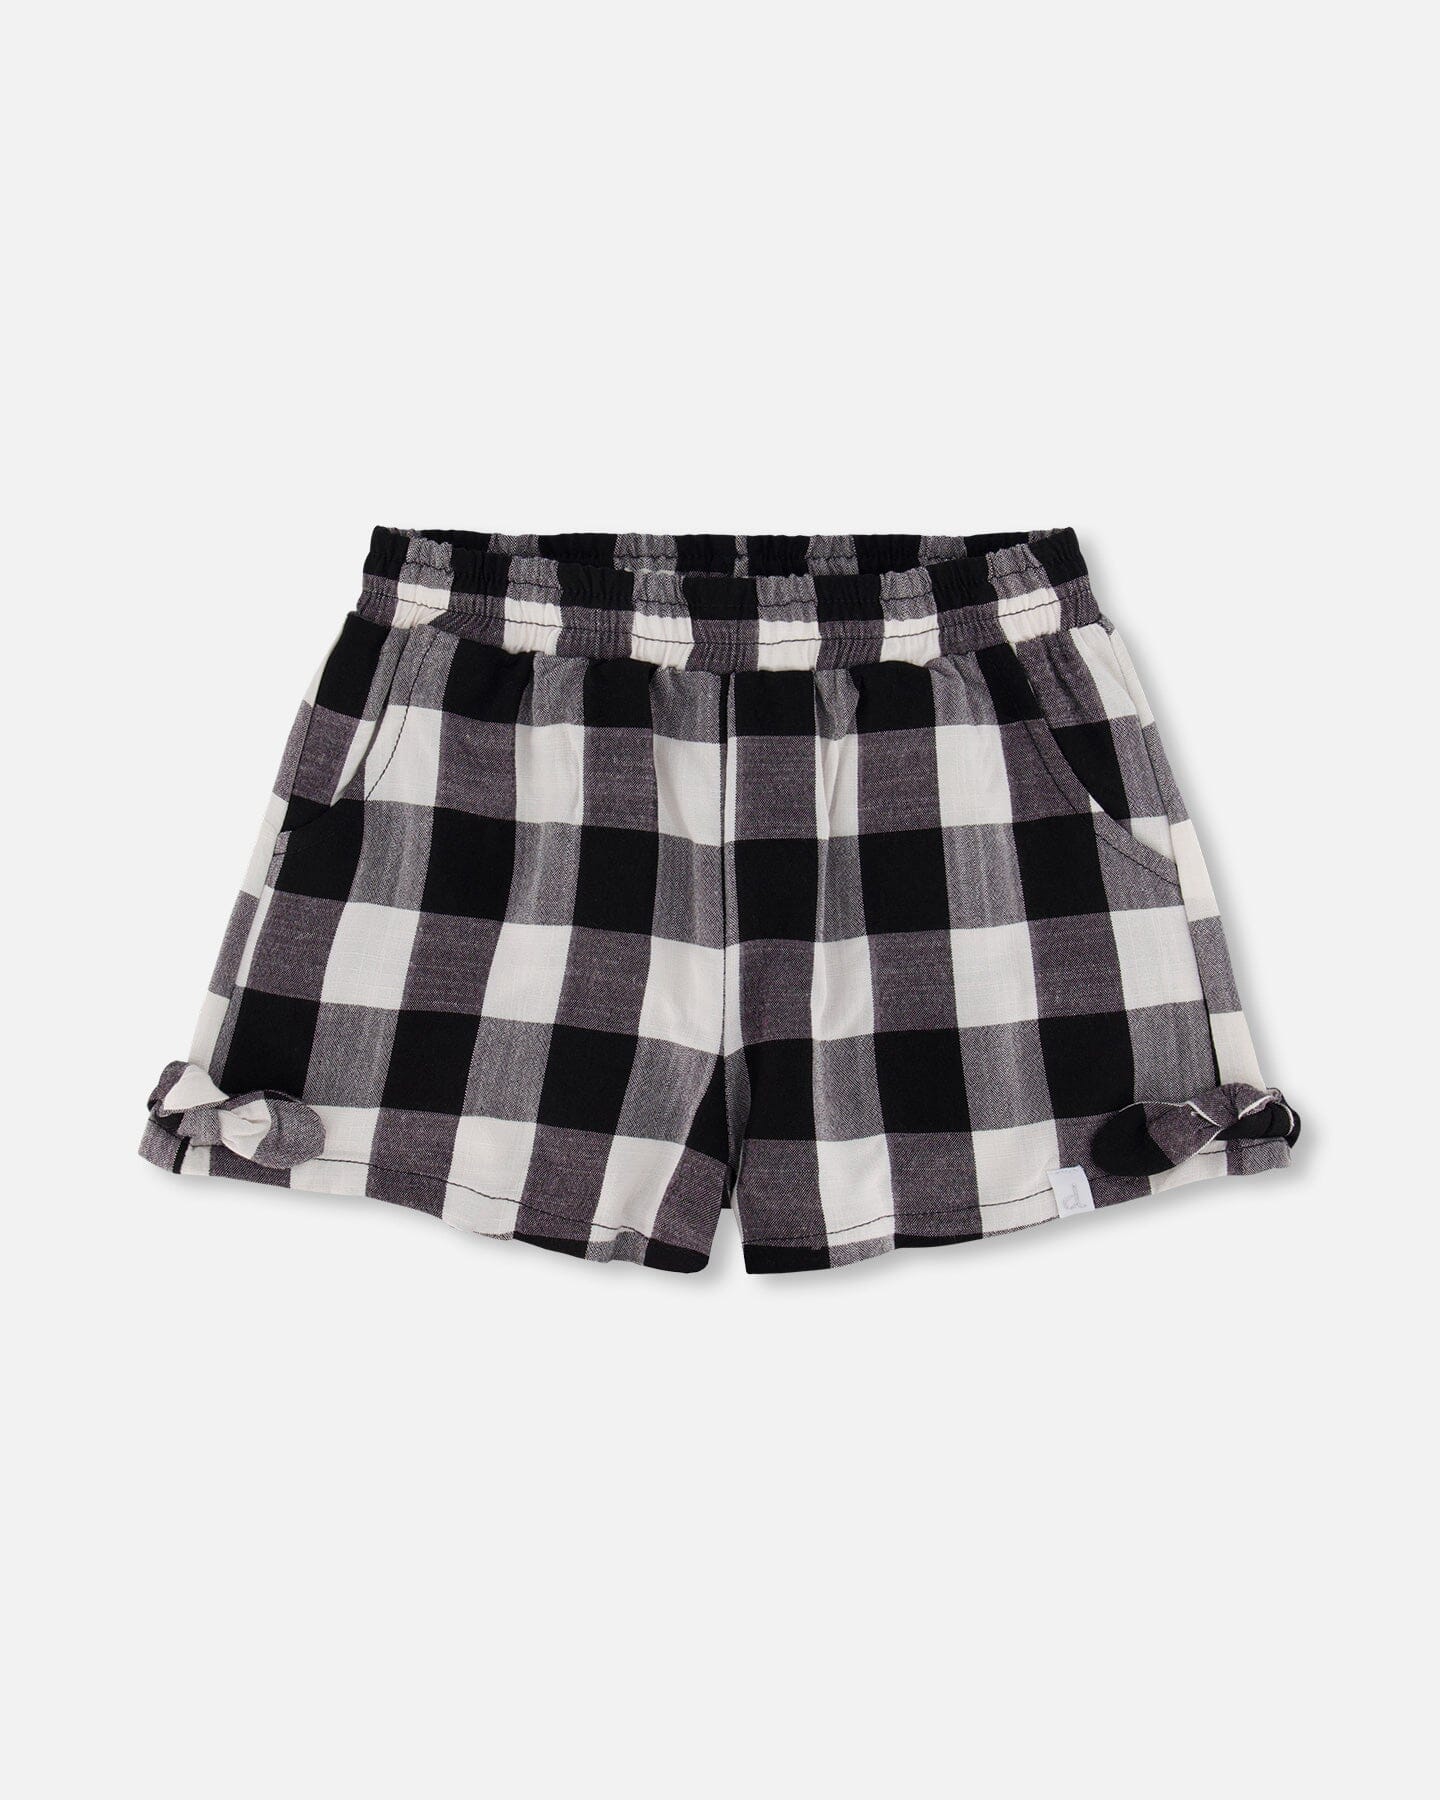 Short With Knots Vichy Black And White - F30K27_029